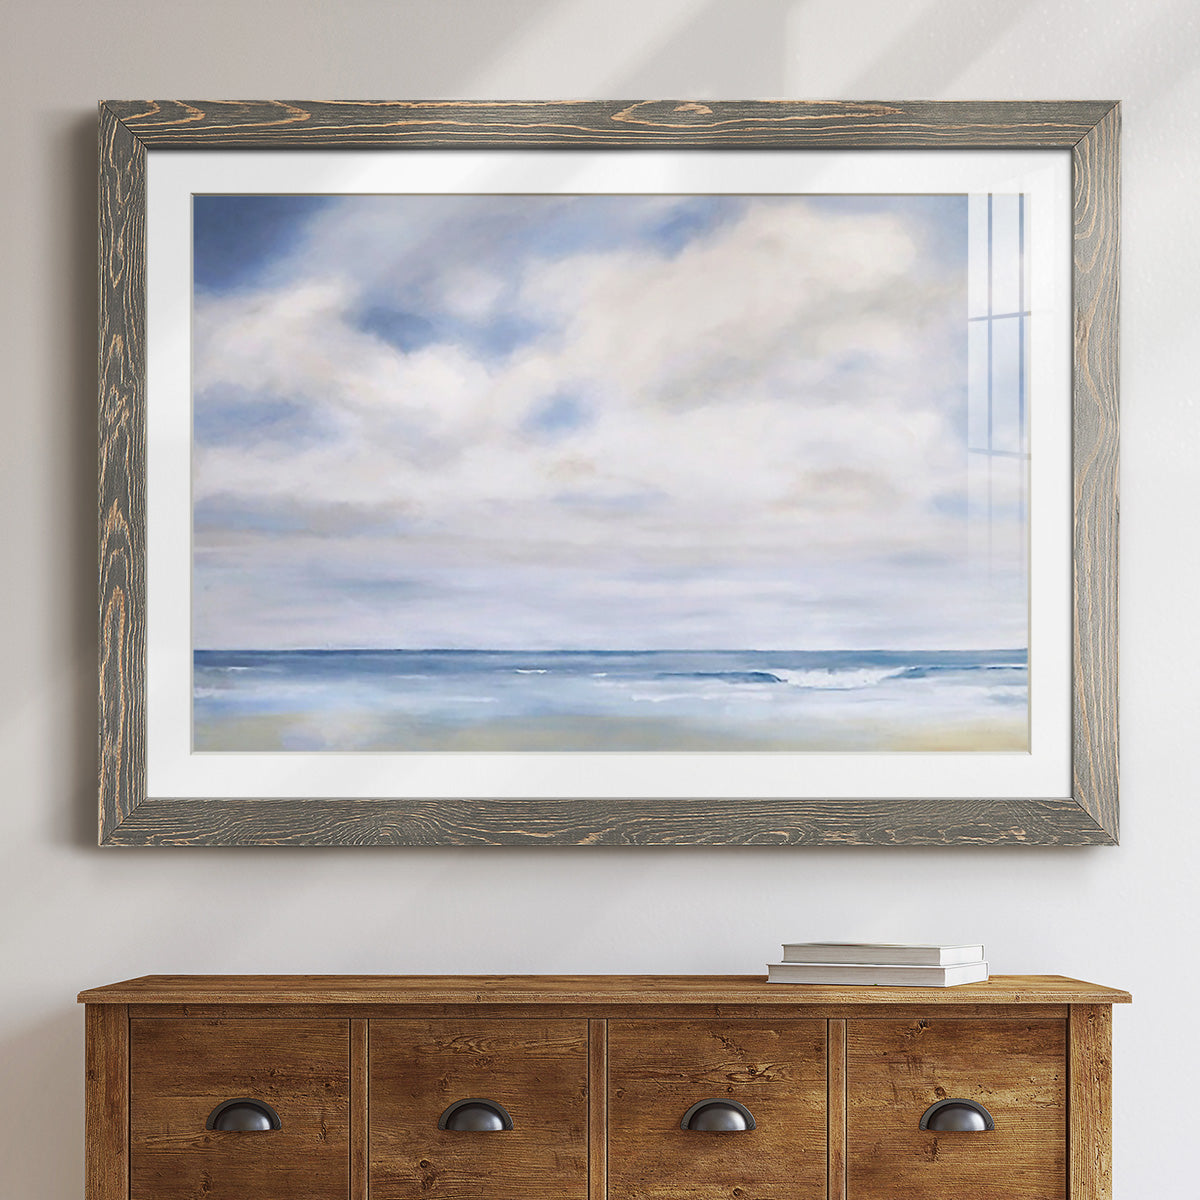 The Wave-Premium Framed Print - Ready to Hang